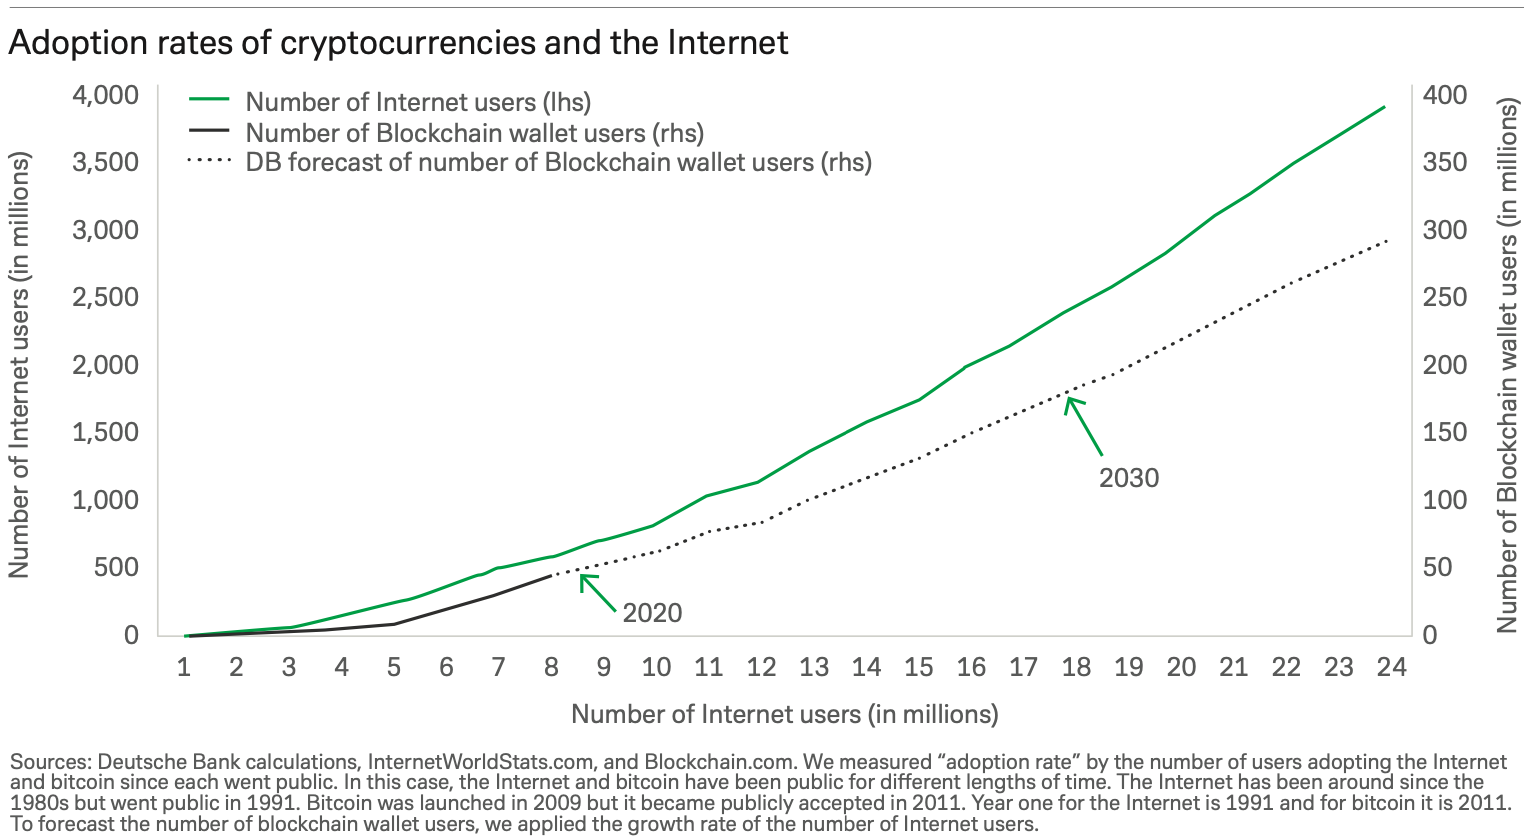 A graph comparing the adoption of cryptocurrencies to the adoption of the internet.